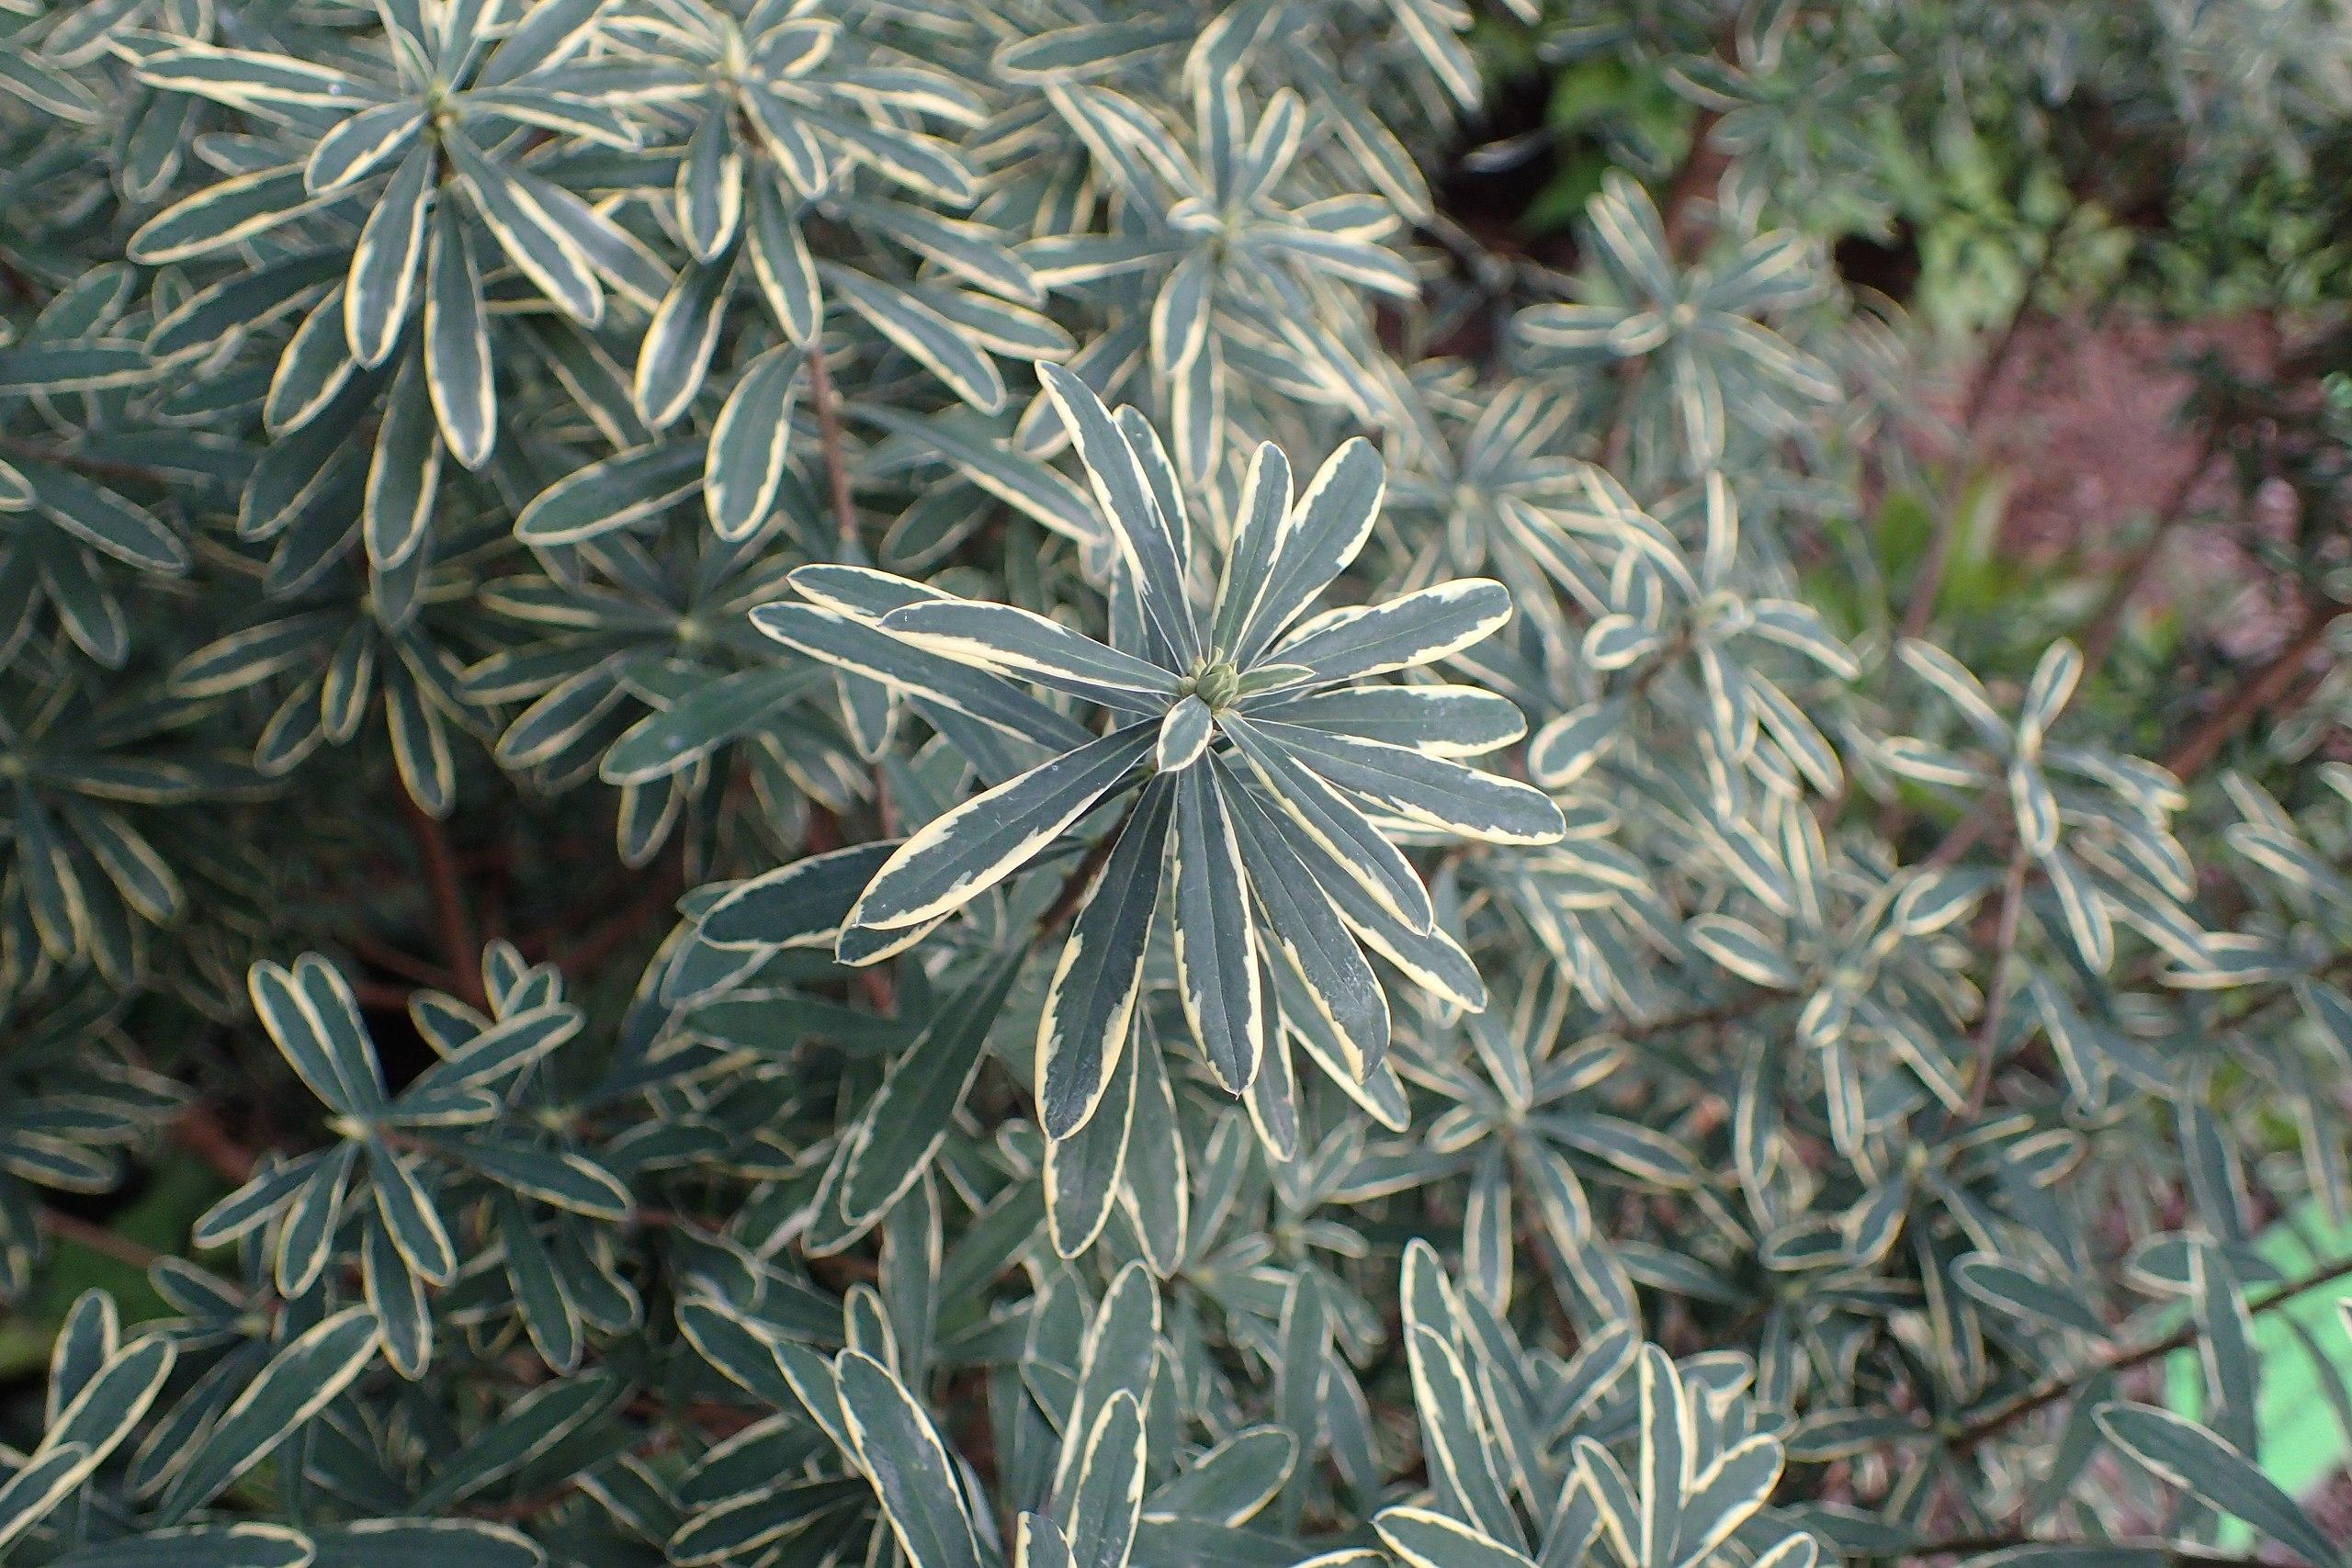 yellow-green foliage with brown stems